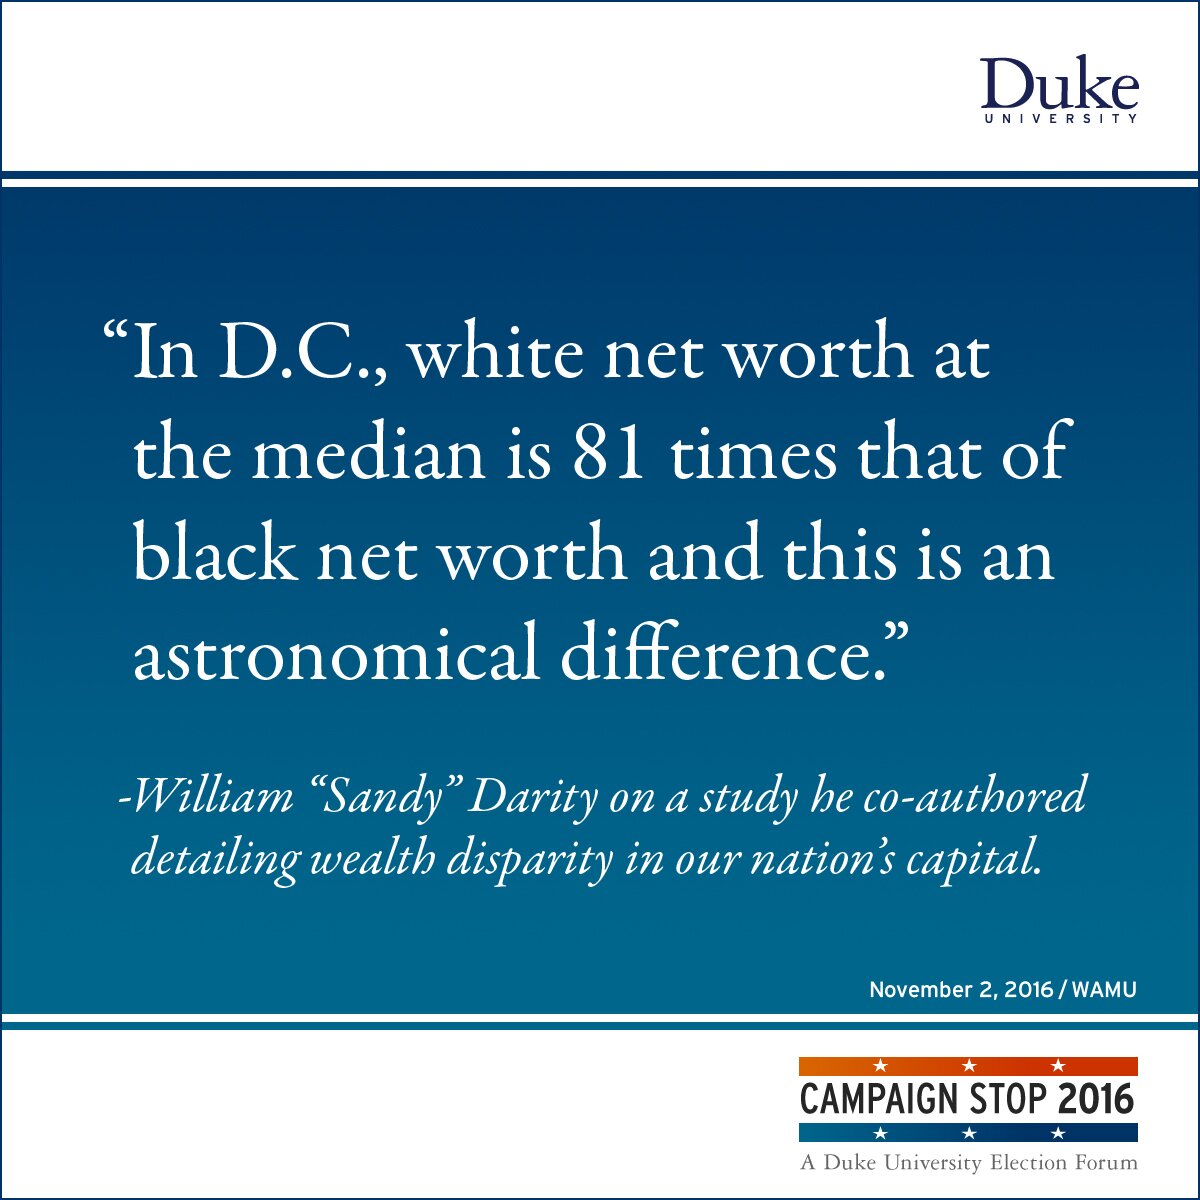 “In D.C., white net worth at the median is 81 times that of black net worth and this is an astronomical difference.” -William “Sandy” Darity on a study he co-authored detailing wealth disparity in our nation’s capital.